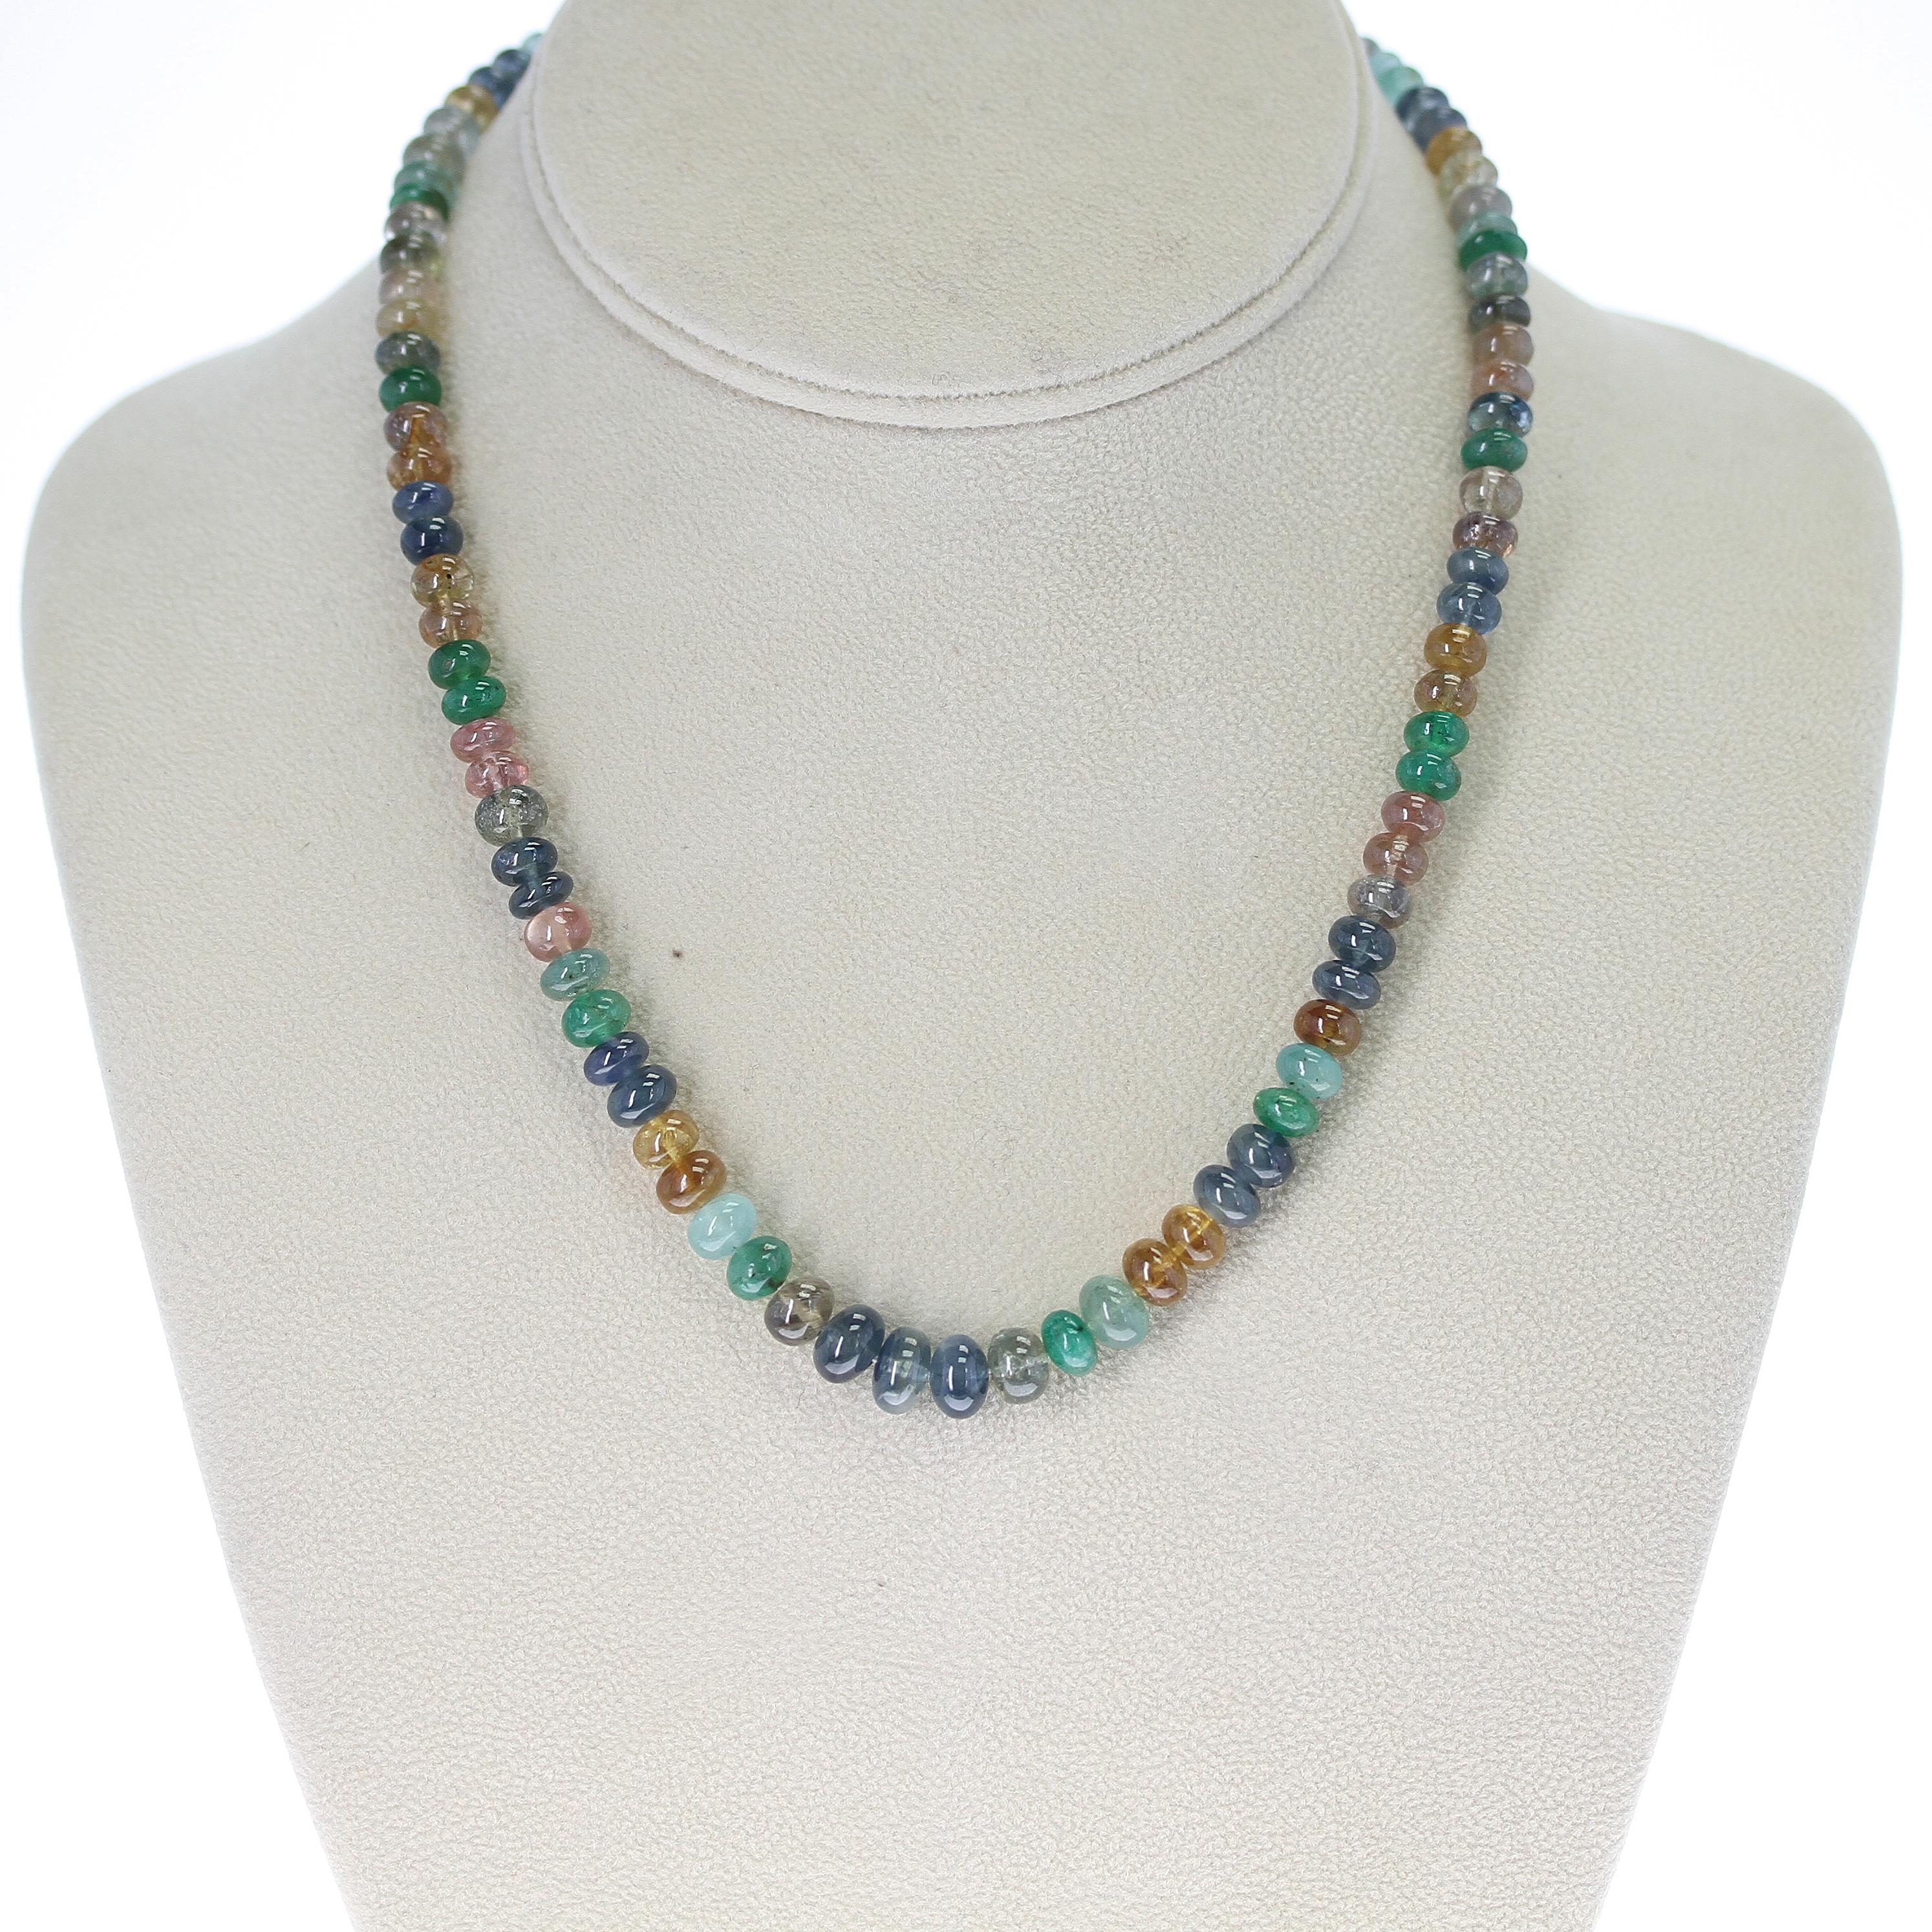 A Genuine & Natural Smooth Multi-Color Sapphire and Emerald Beads Necklace with a 14K Clasp, weighing 180 carats. The length is 17 inches and the size of the beads range from 6MM to 8MM. 

We can also customize the necklace according to your